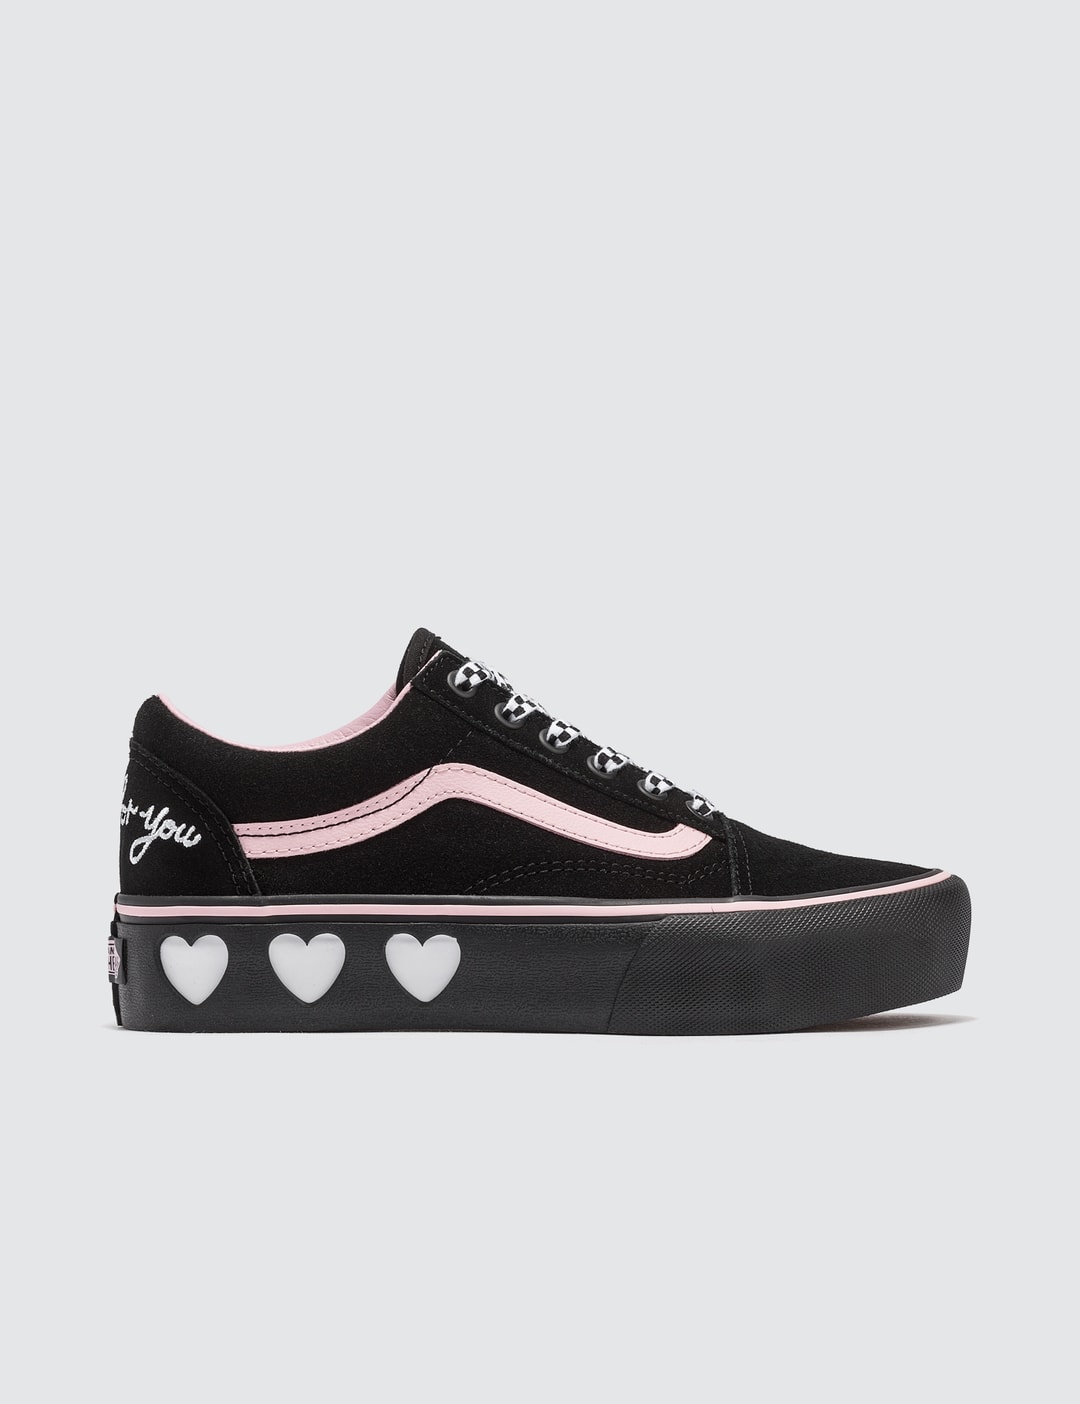 Vans - Lazy Oaf x Vans Old Skool | HBX - Globally Curated Fashion and Lifestyle by Hypebeast